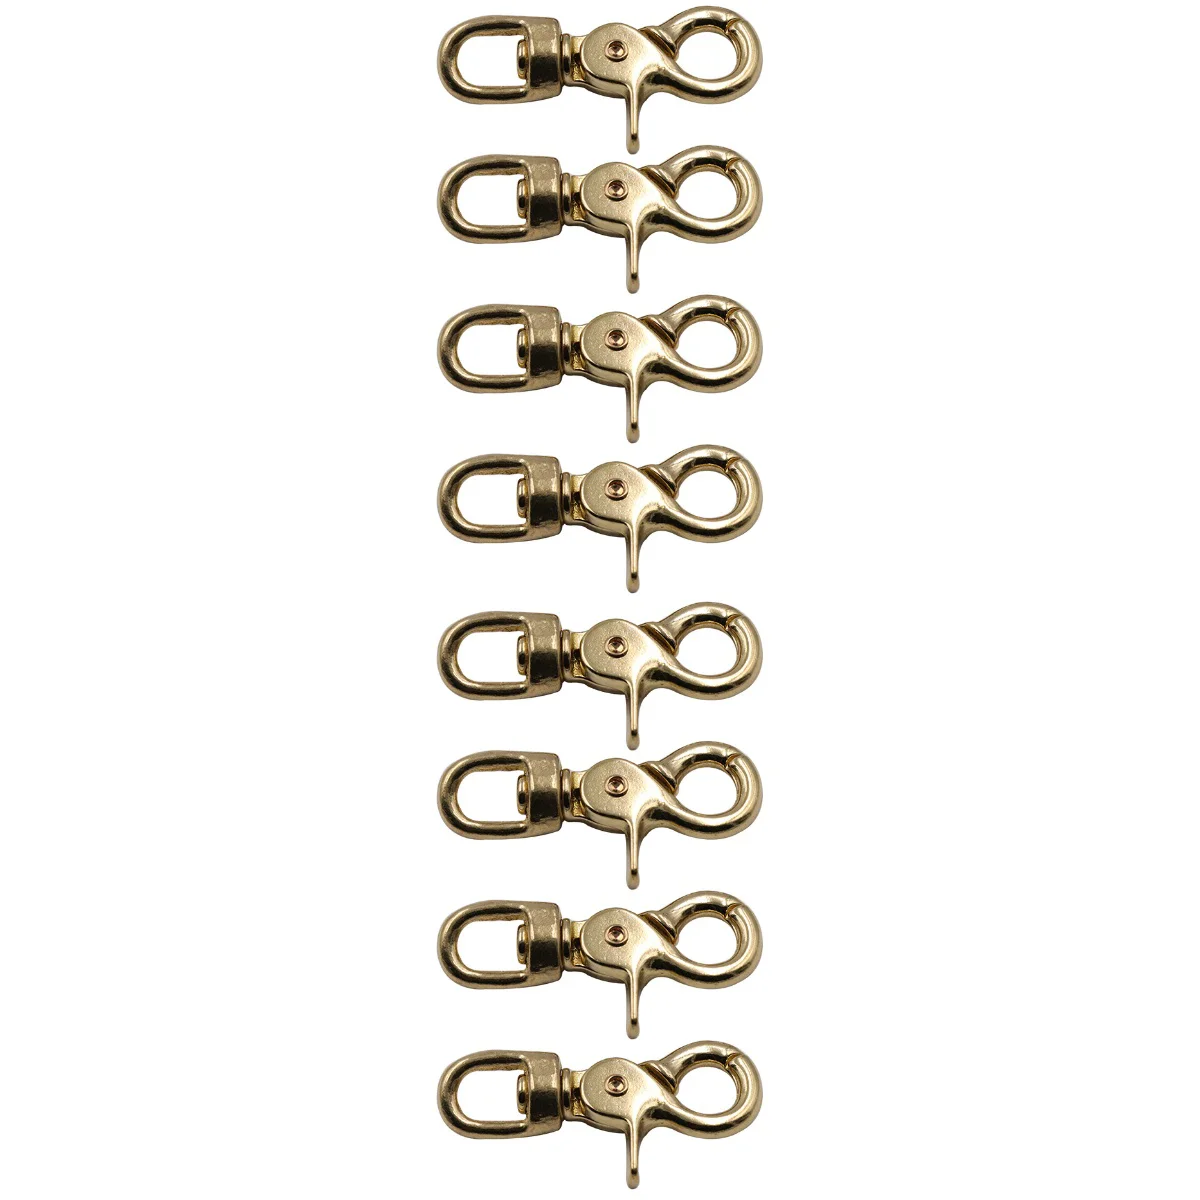 

8 Pcs Brass Lobster Clasp Oval Swivel Trigger Clips Hooks for Straps Bags Belting Leathercraft